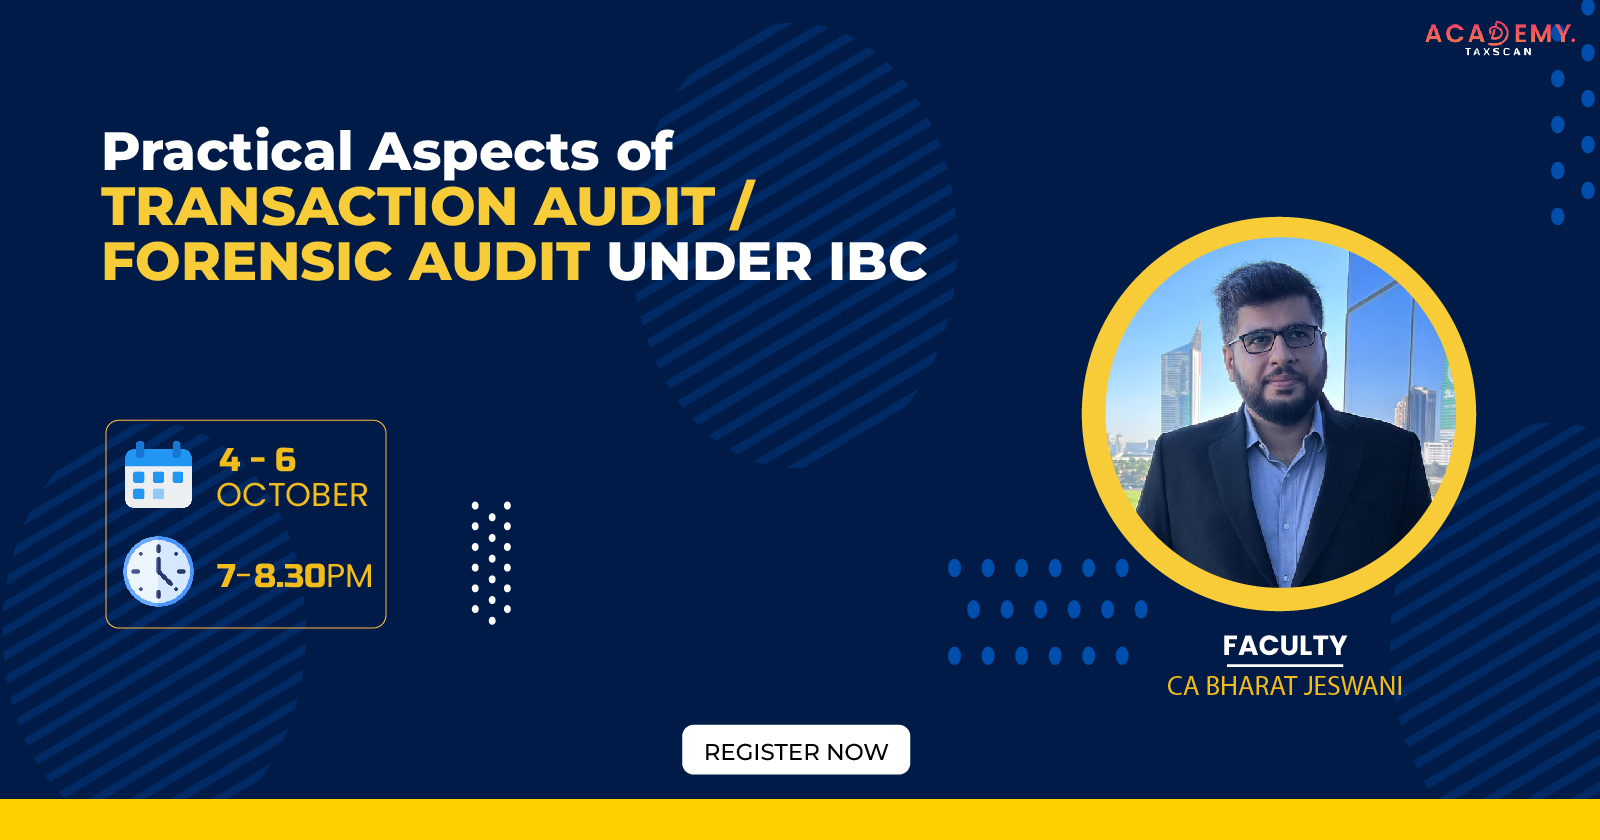 Practical aspects of Transaction Audit - Practical aspects - Transaction Audit - Audit - Forensic Audit - IBC - online certificate course - Course 2023 - online certificate course 2023 - taxscan academy